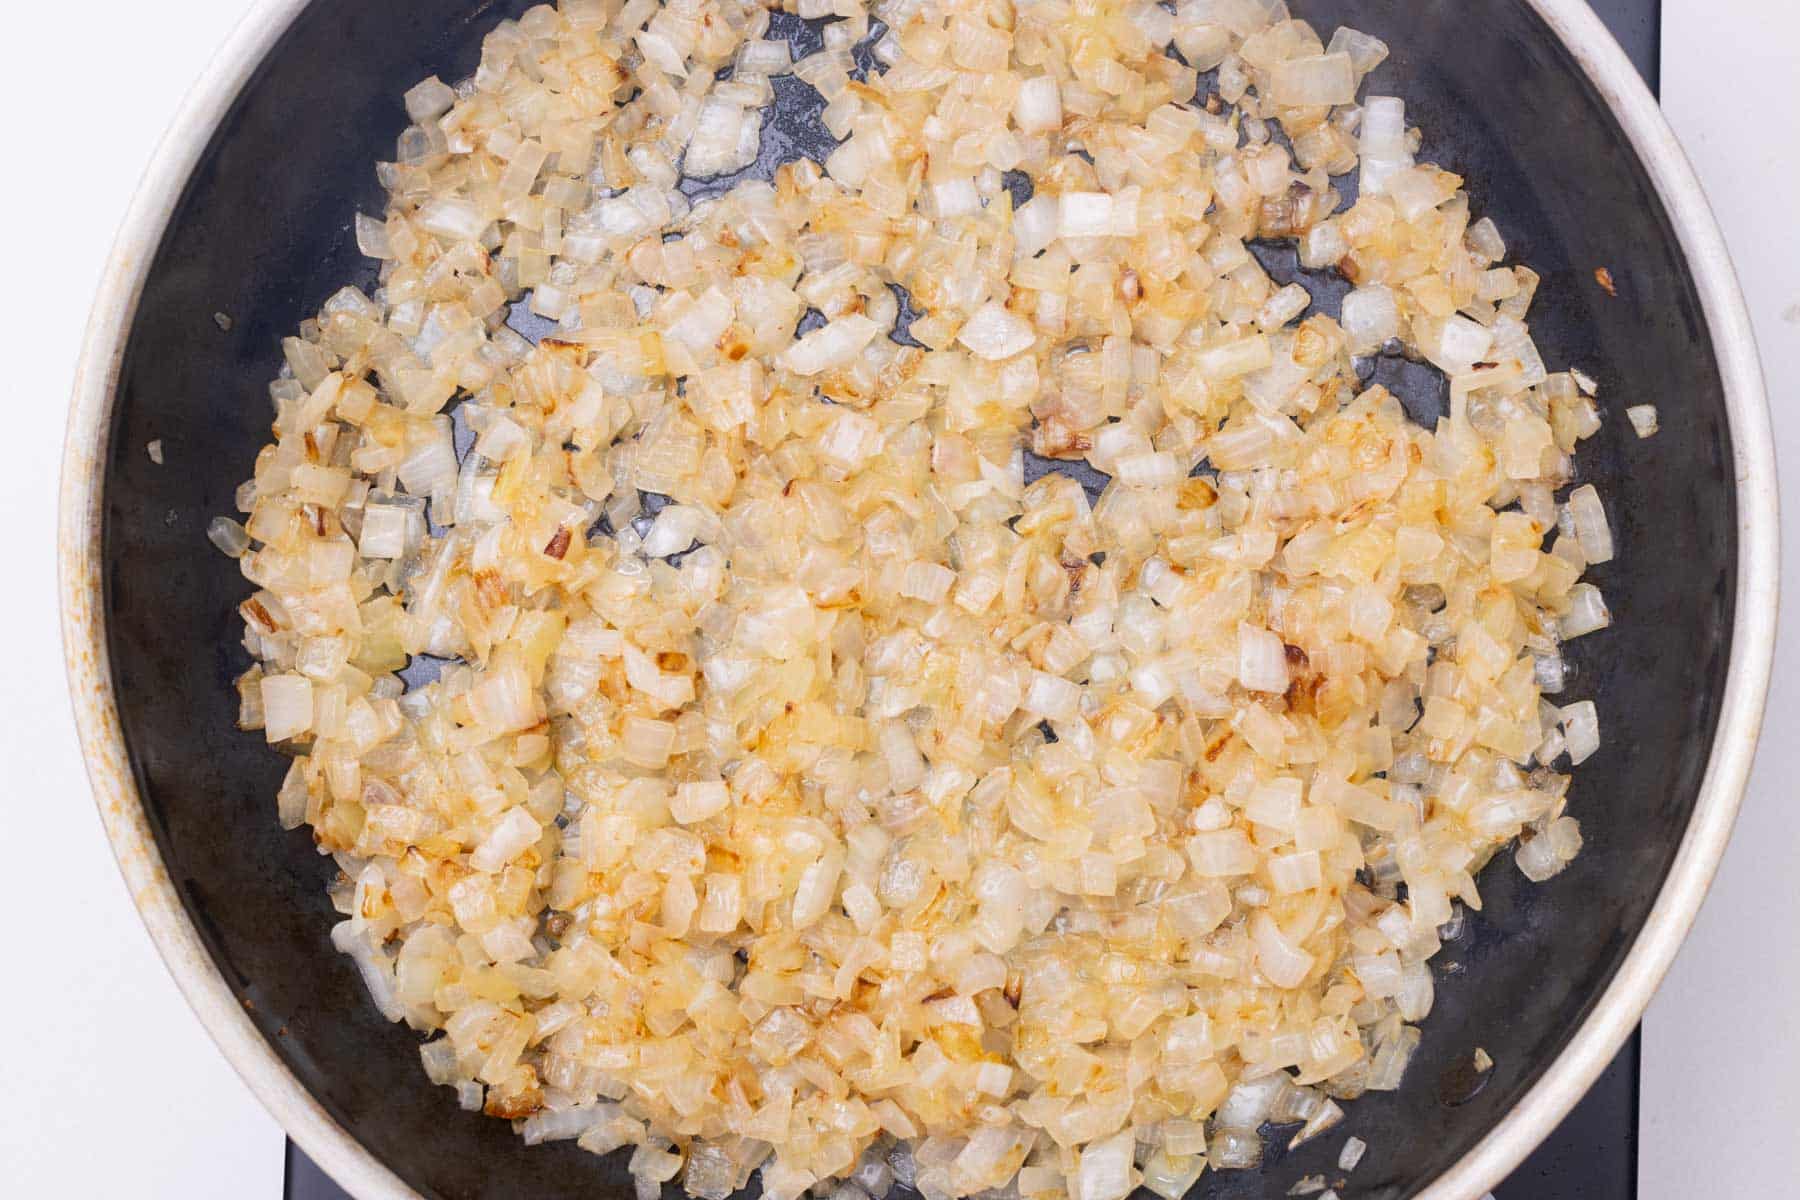 Onions are caramelized in a skillet.